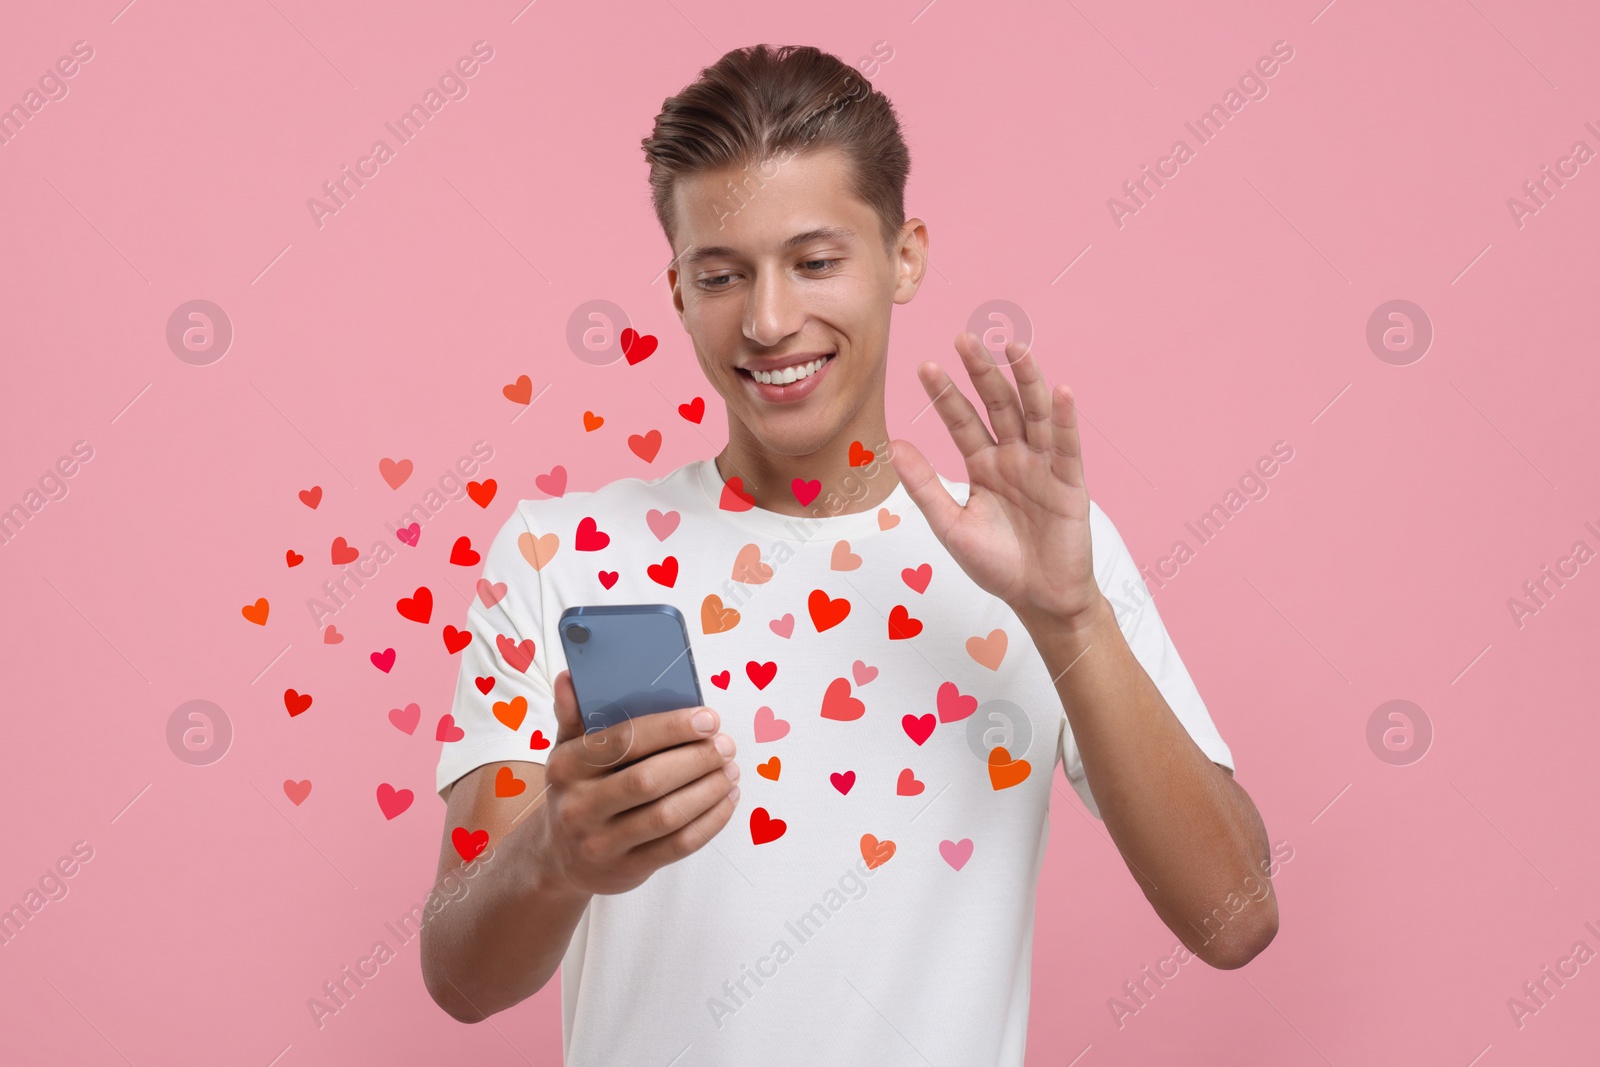 Image of Long distance love. Man video chatting with sweetheart via smartphone on pink background. Hearts flying out of device